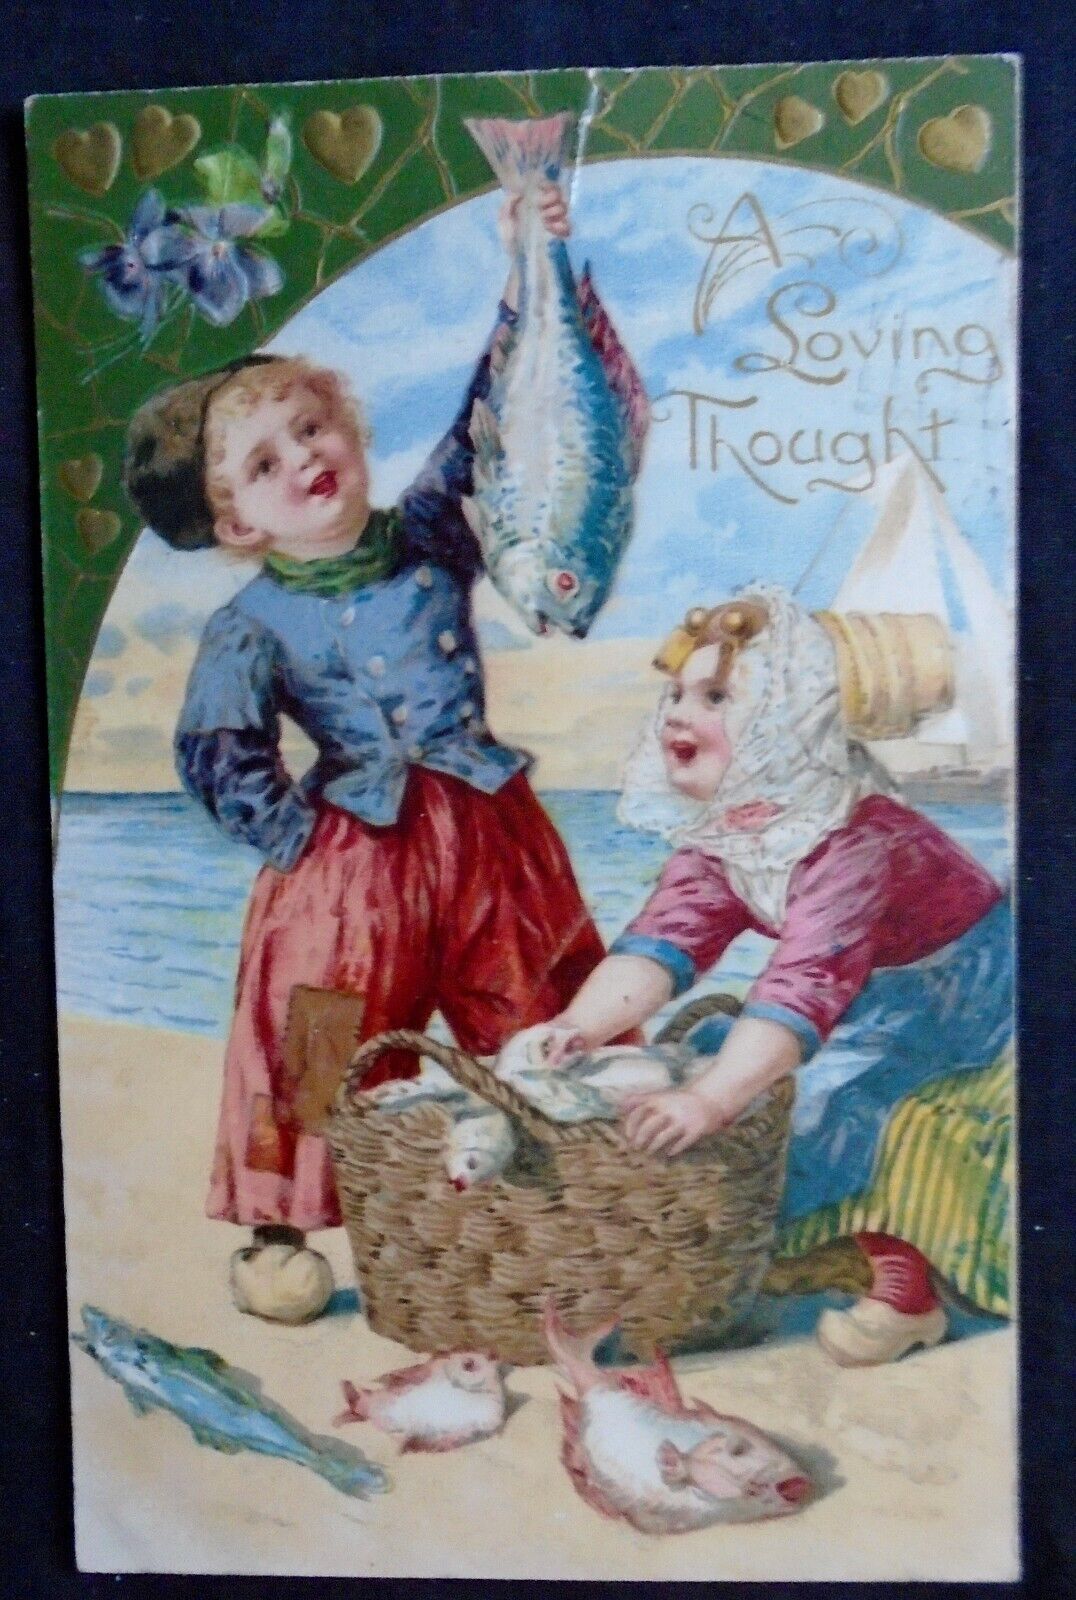 cute 1908 PM Post Card   Loving thoughts   2576